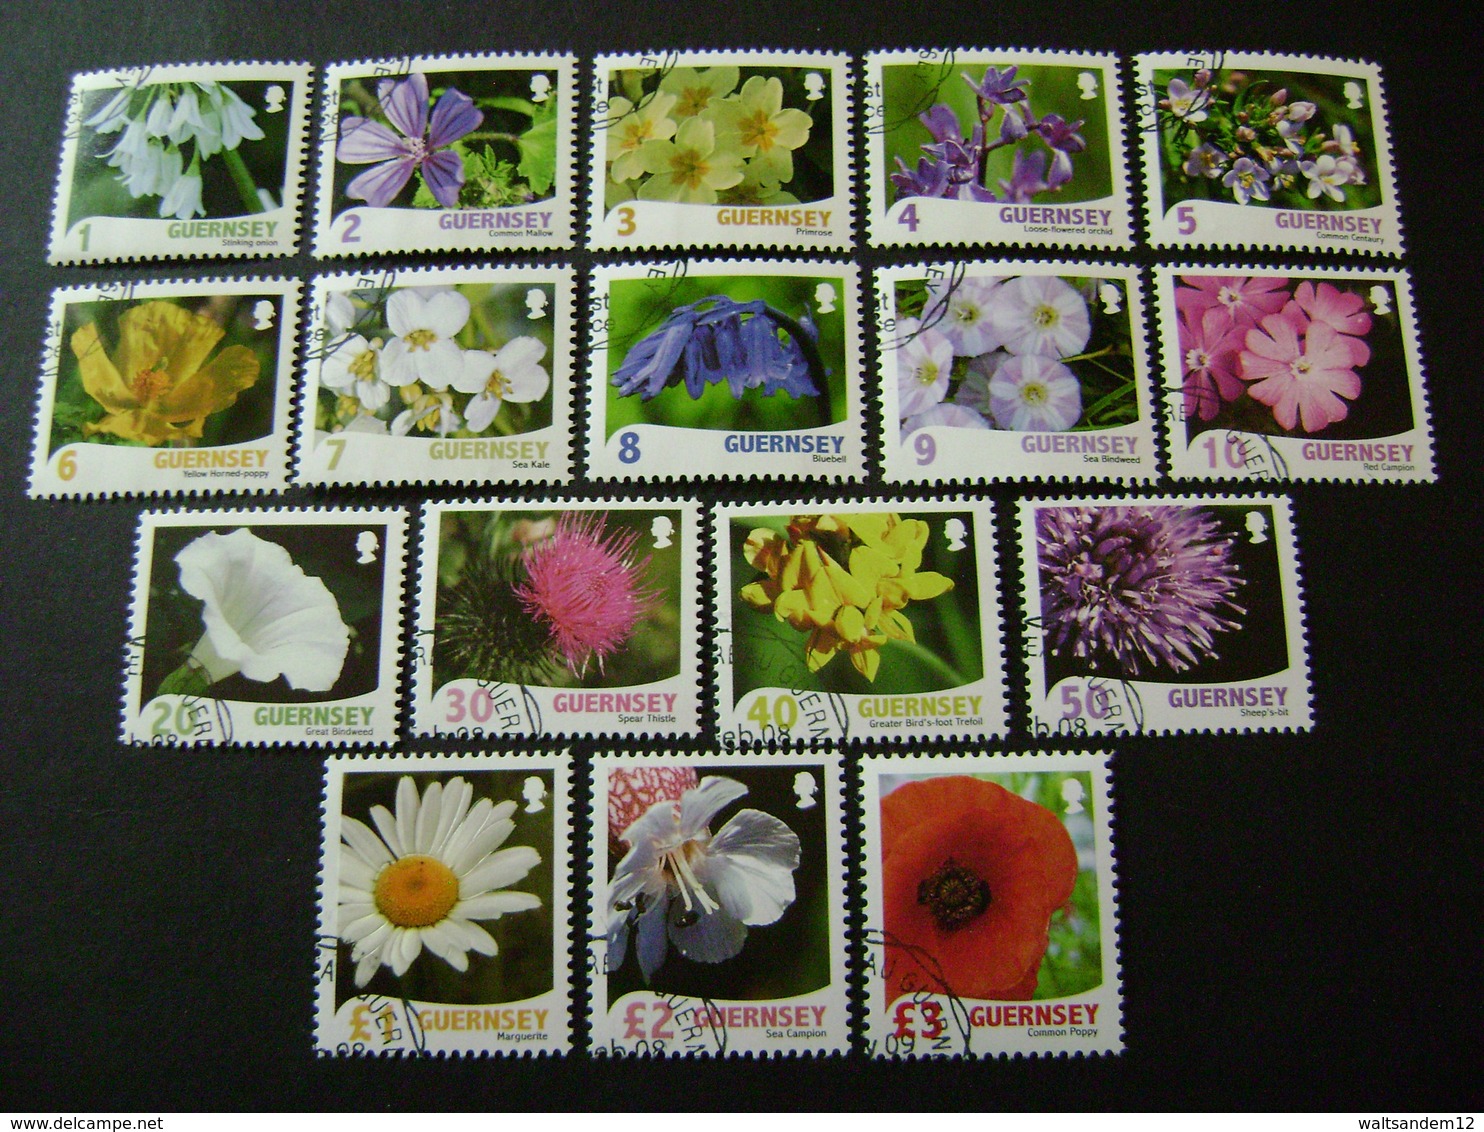 Guernsey 2008-2009 Wild Flowers Definitives (SG 1211-1217,1273-1282) - Used - Guernsey